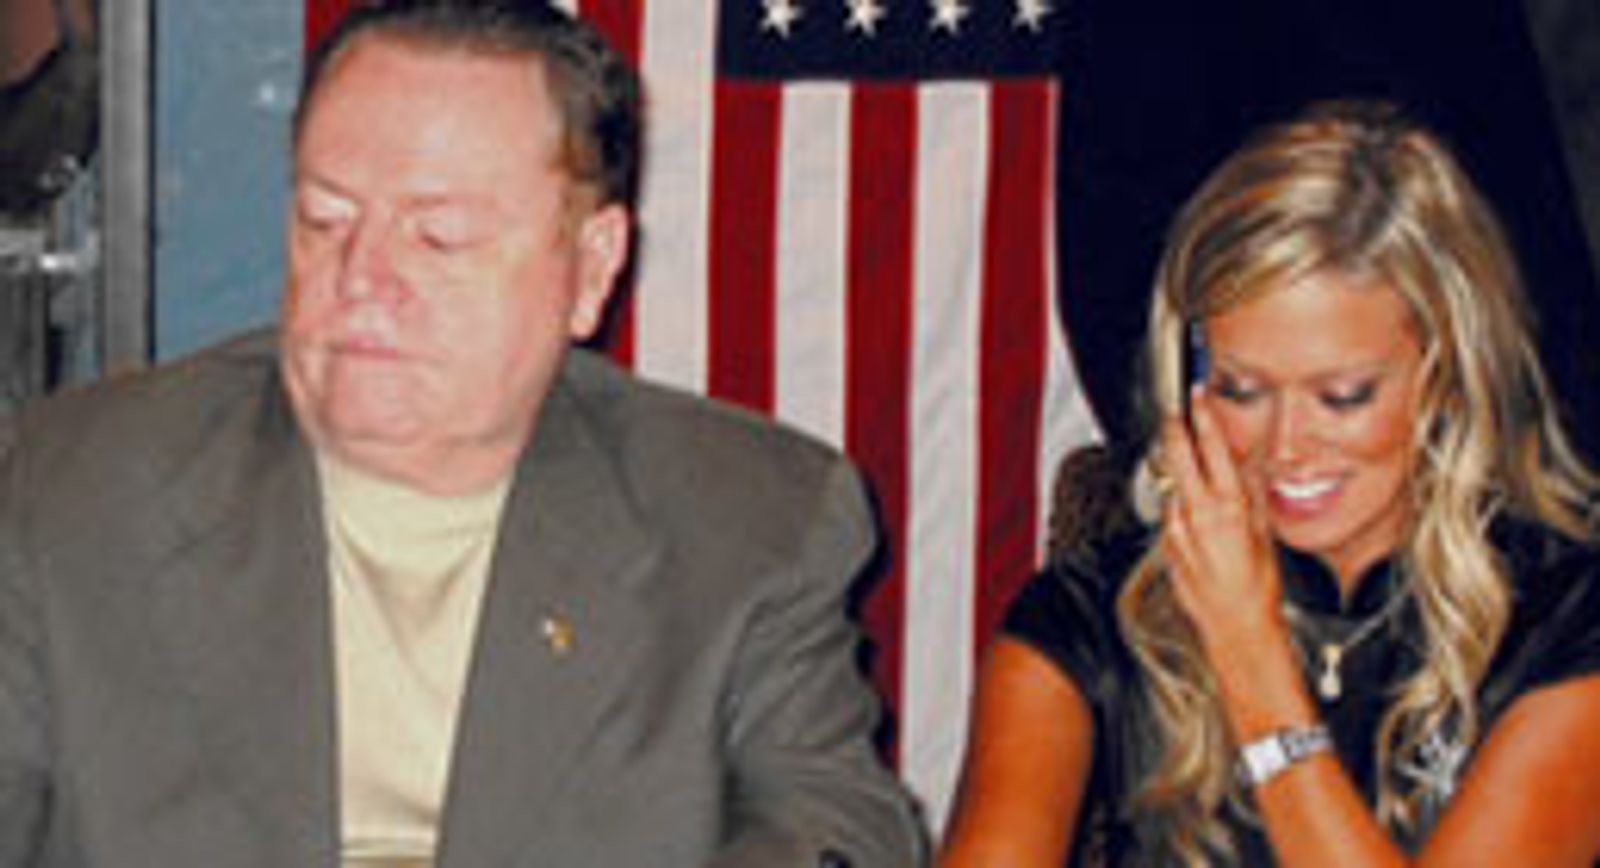 Larry Flynt and Jenna Jameson Launch Freedom Tour 2003